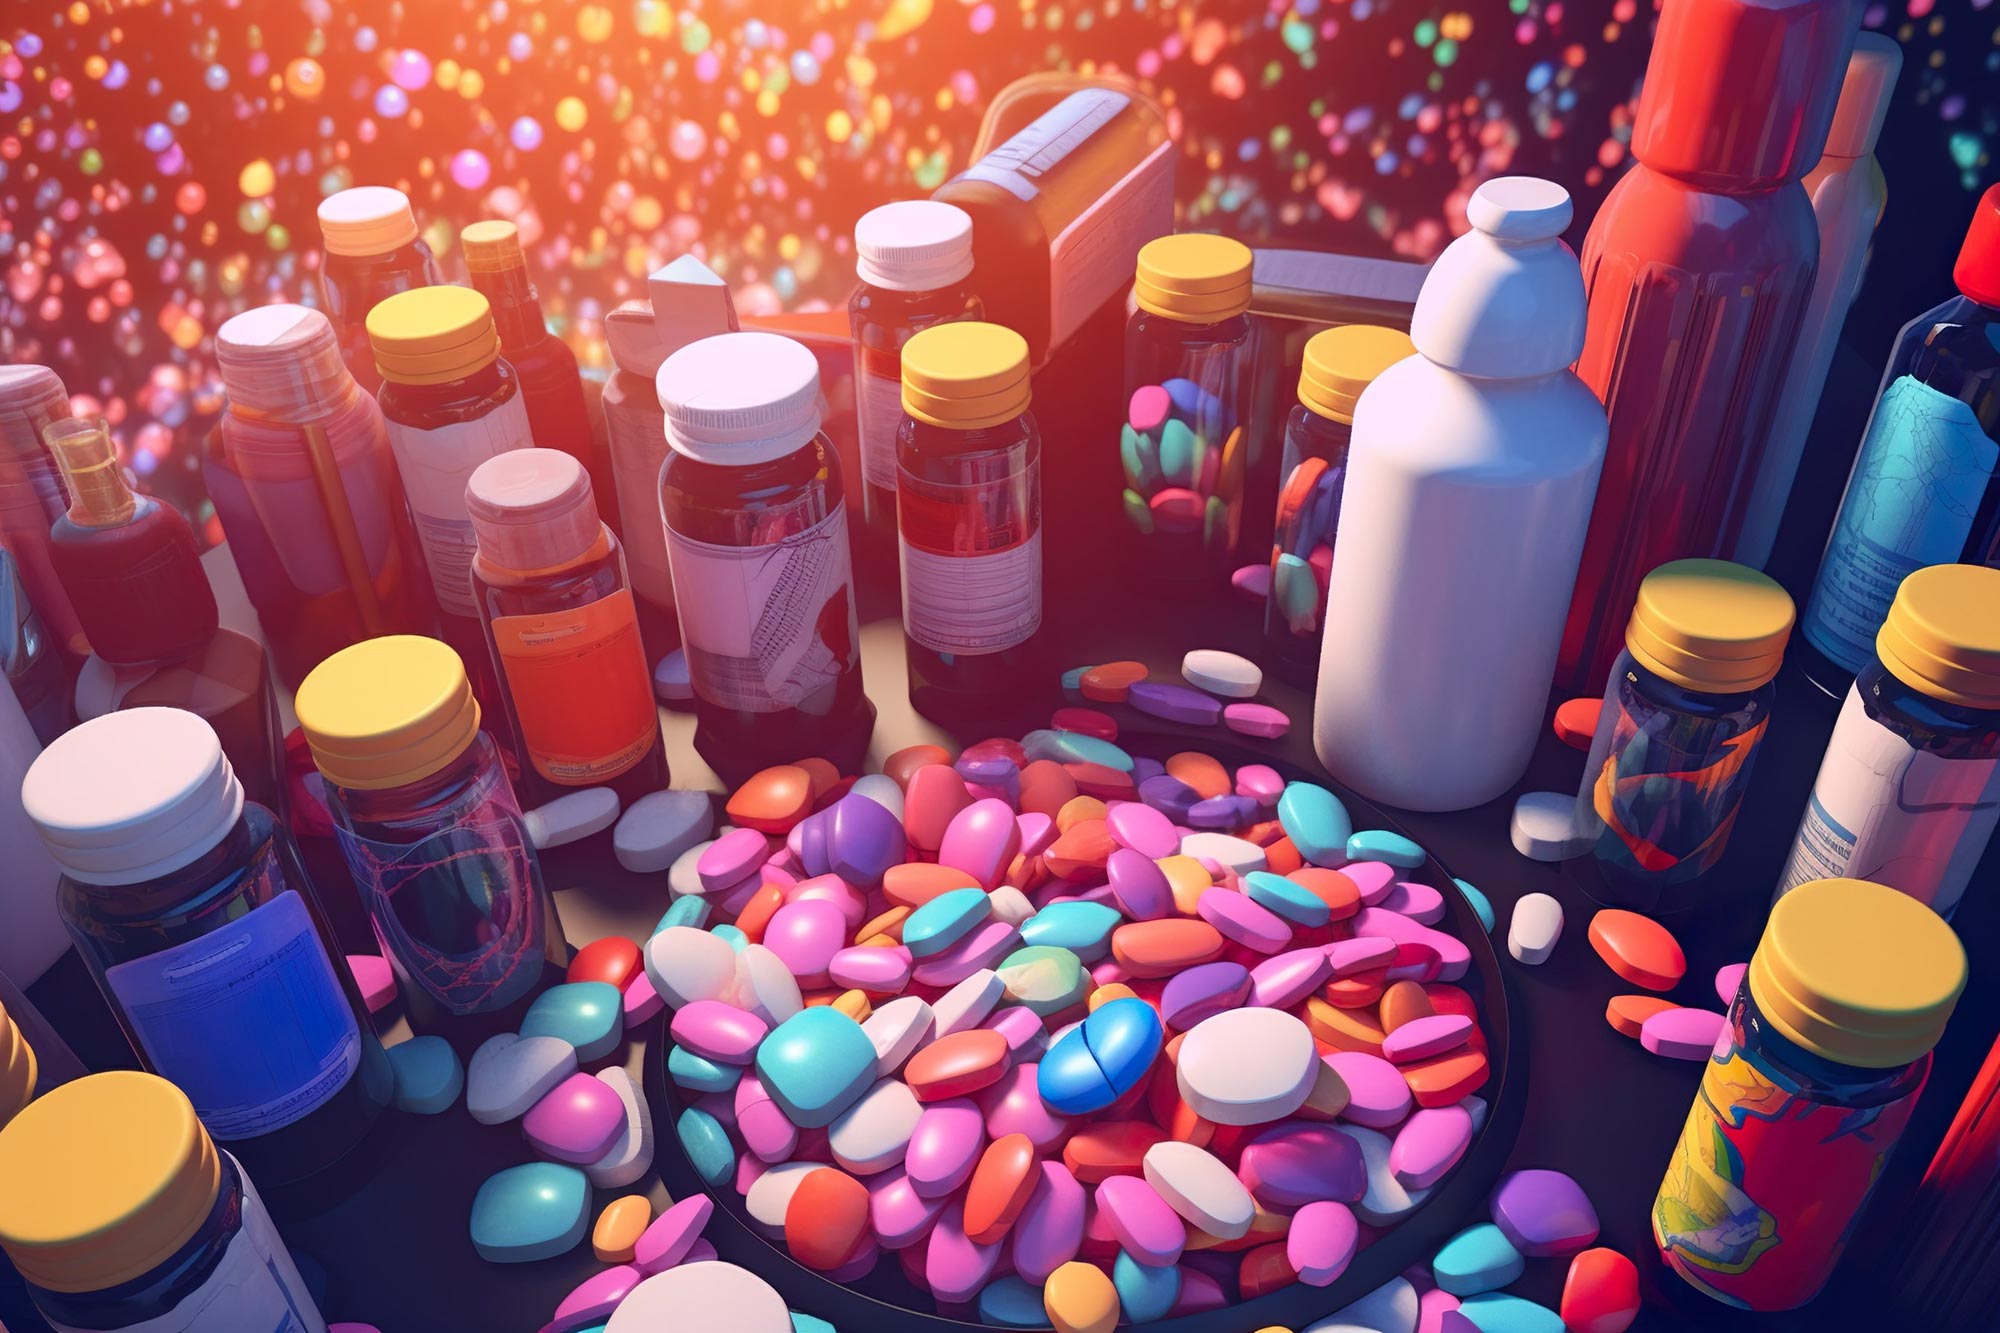 Variety Medications Drug Discovery Concept